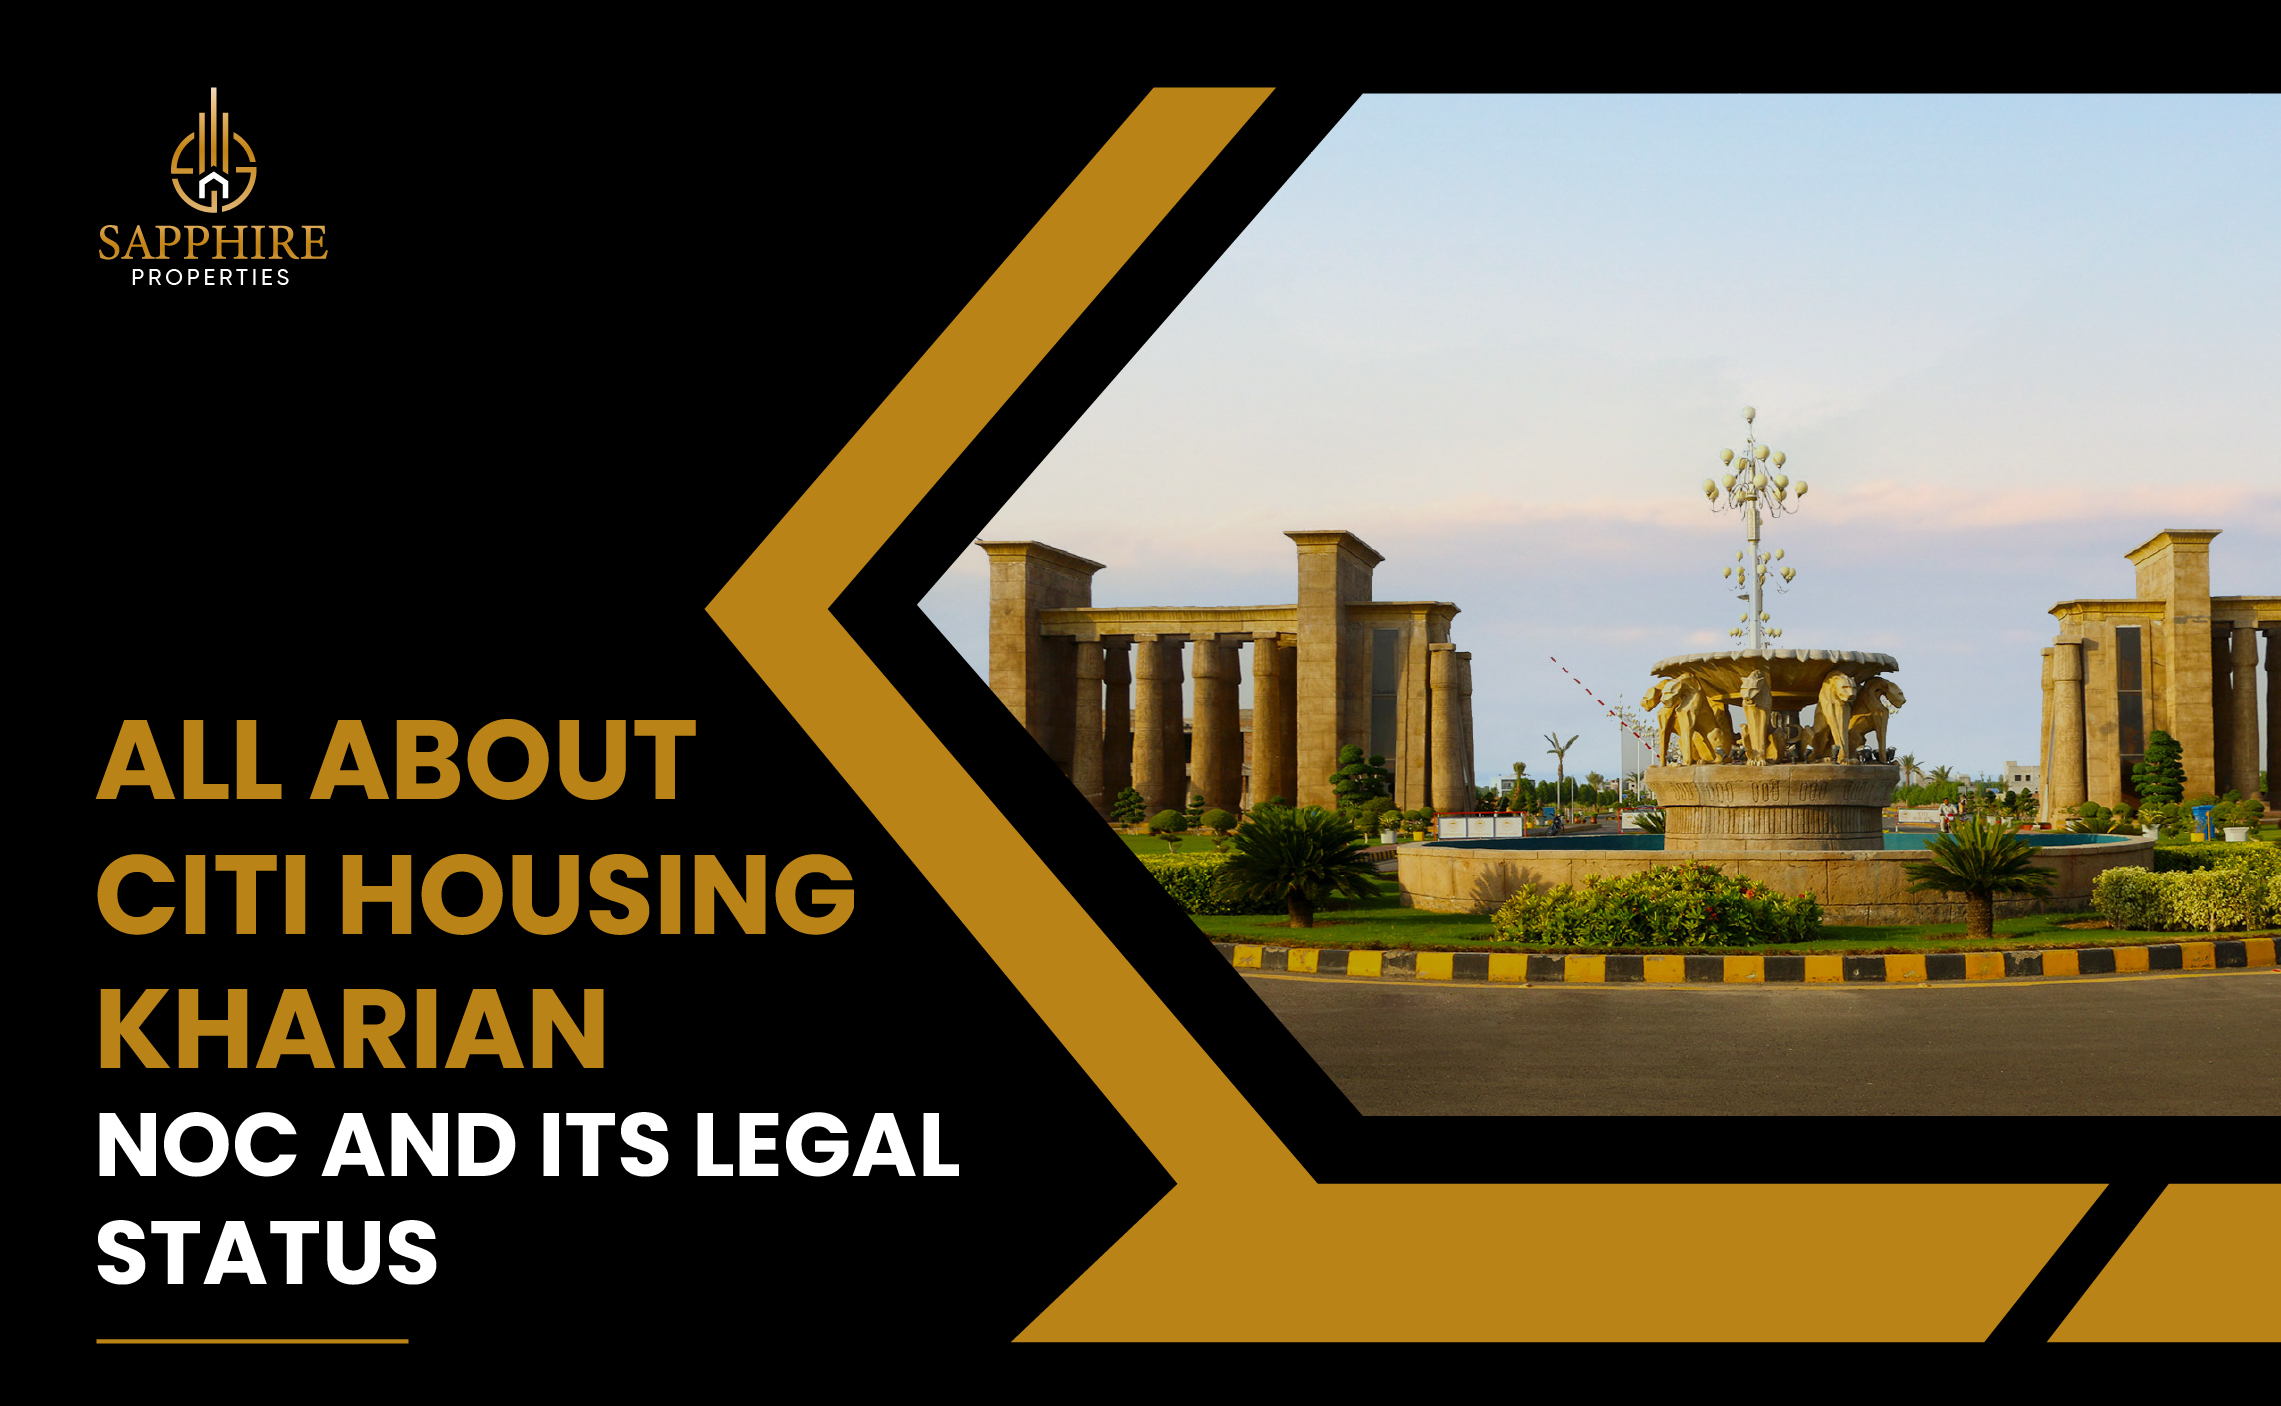 All About Citi Housing Kharian NOC And Its Legal Status@5x-100